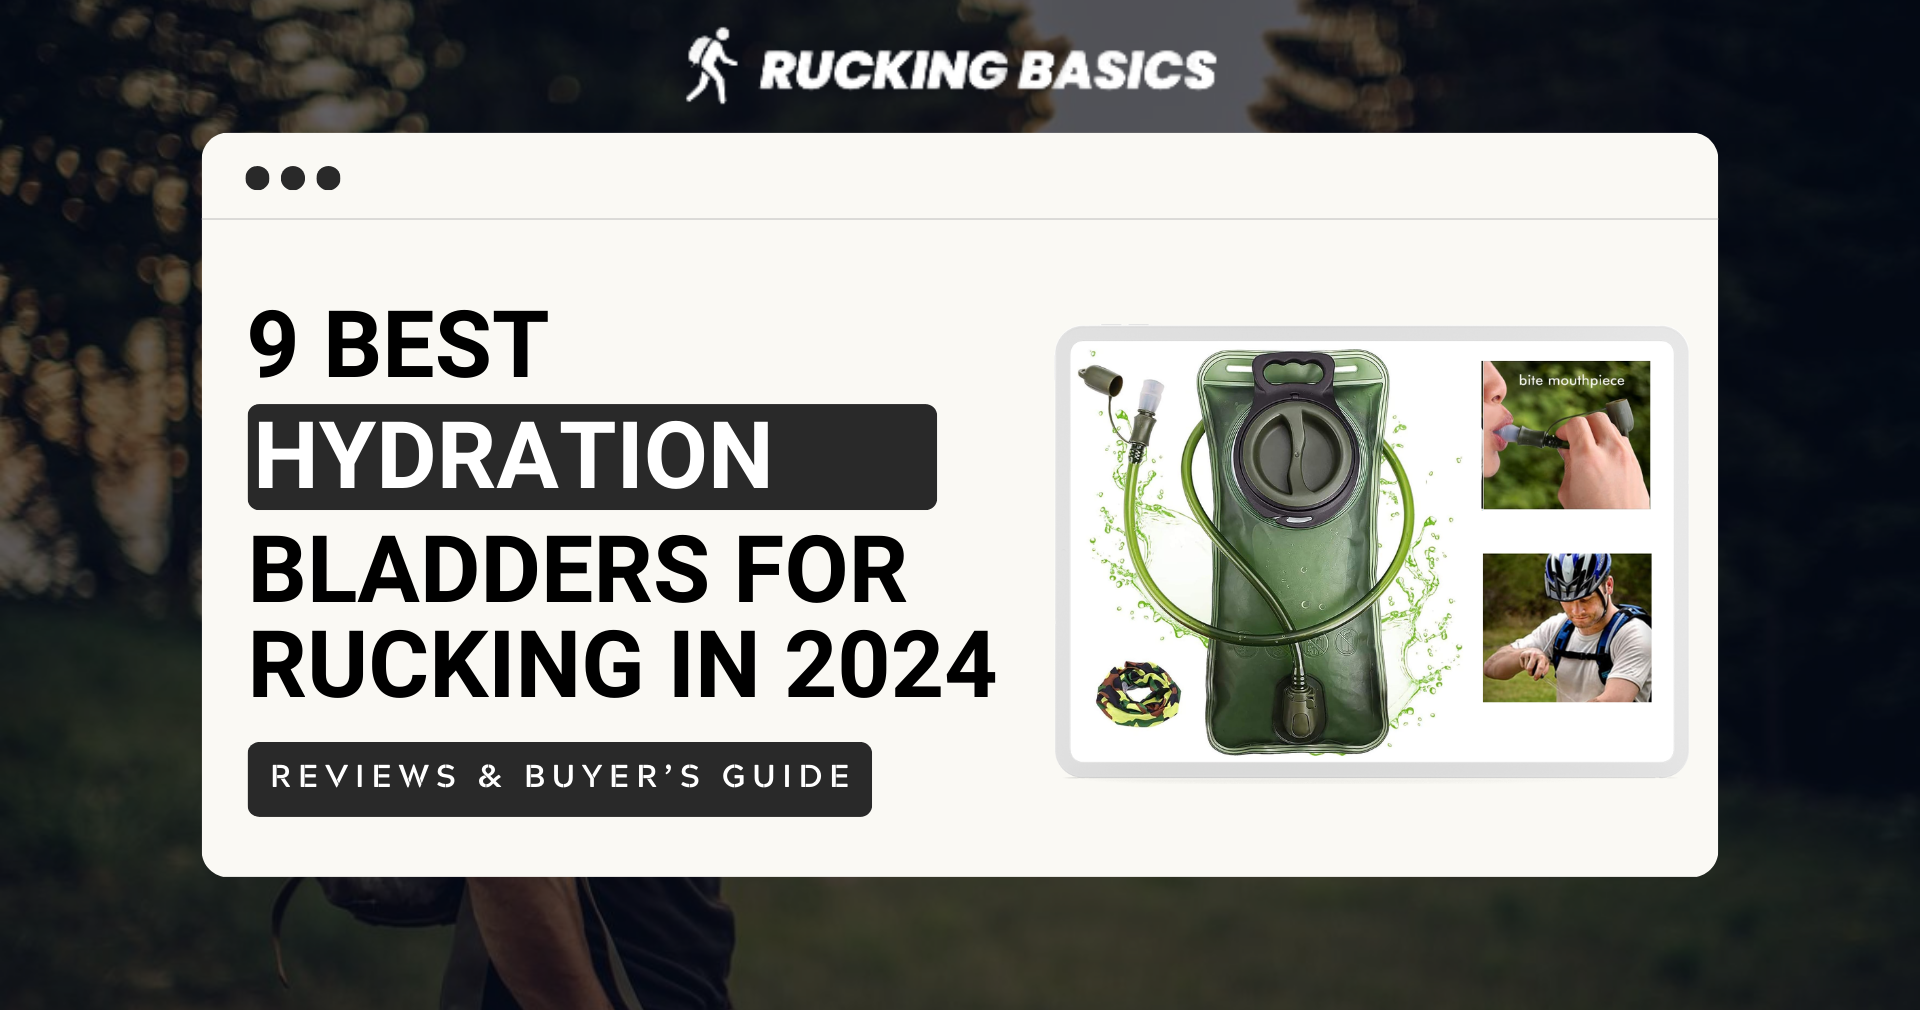 9 Best Hydration Bladders for Rucking in 2024